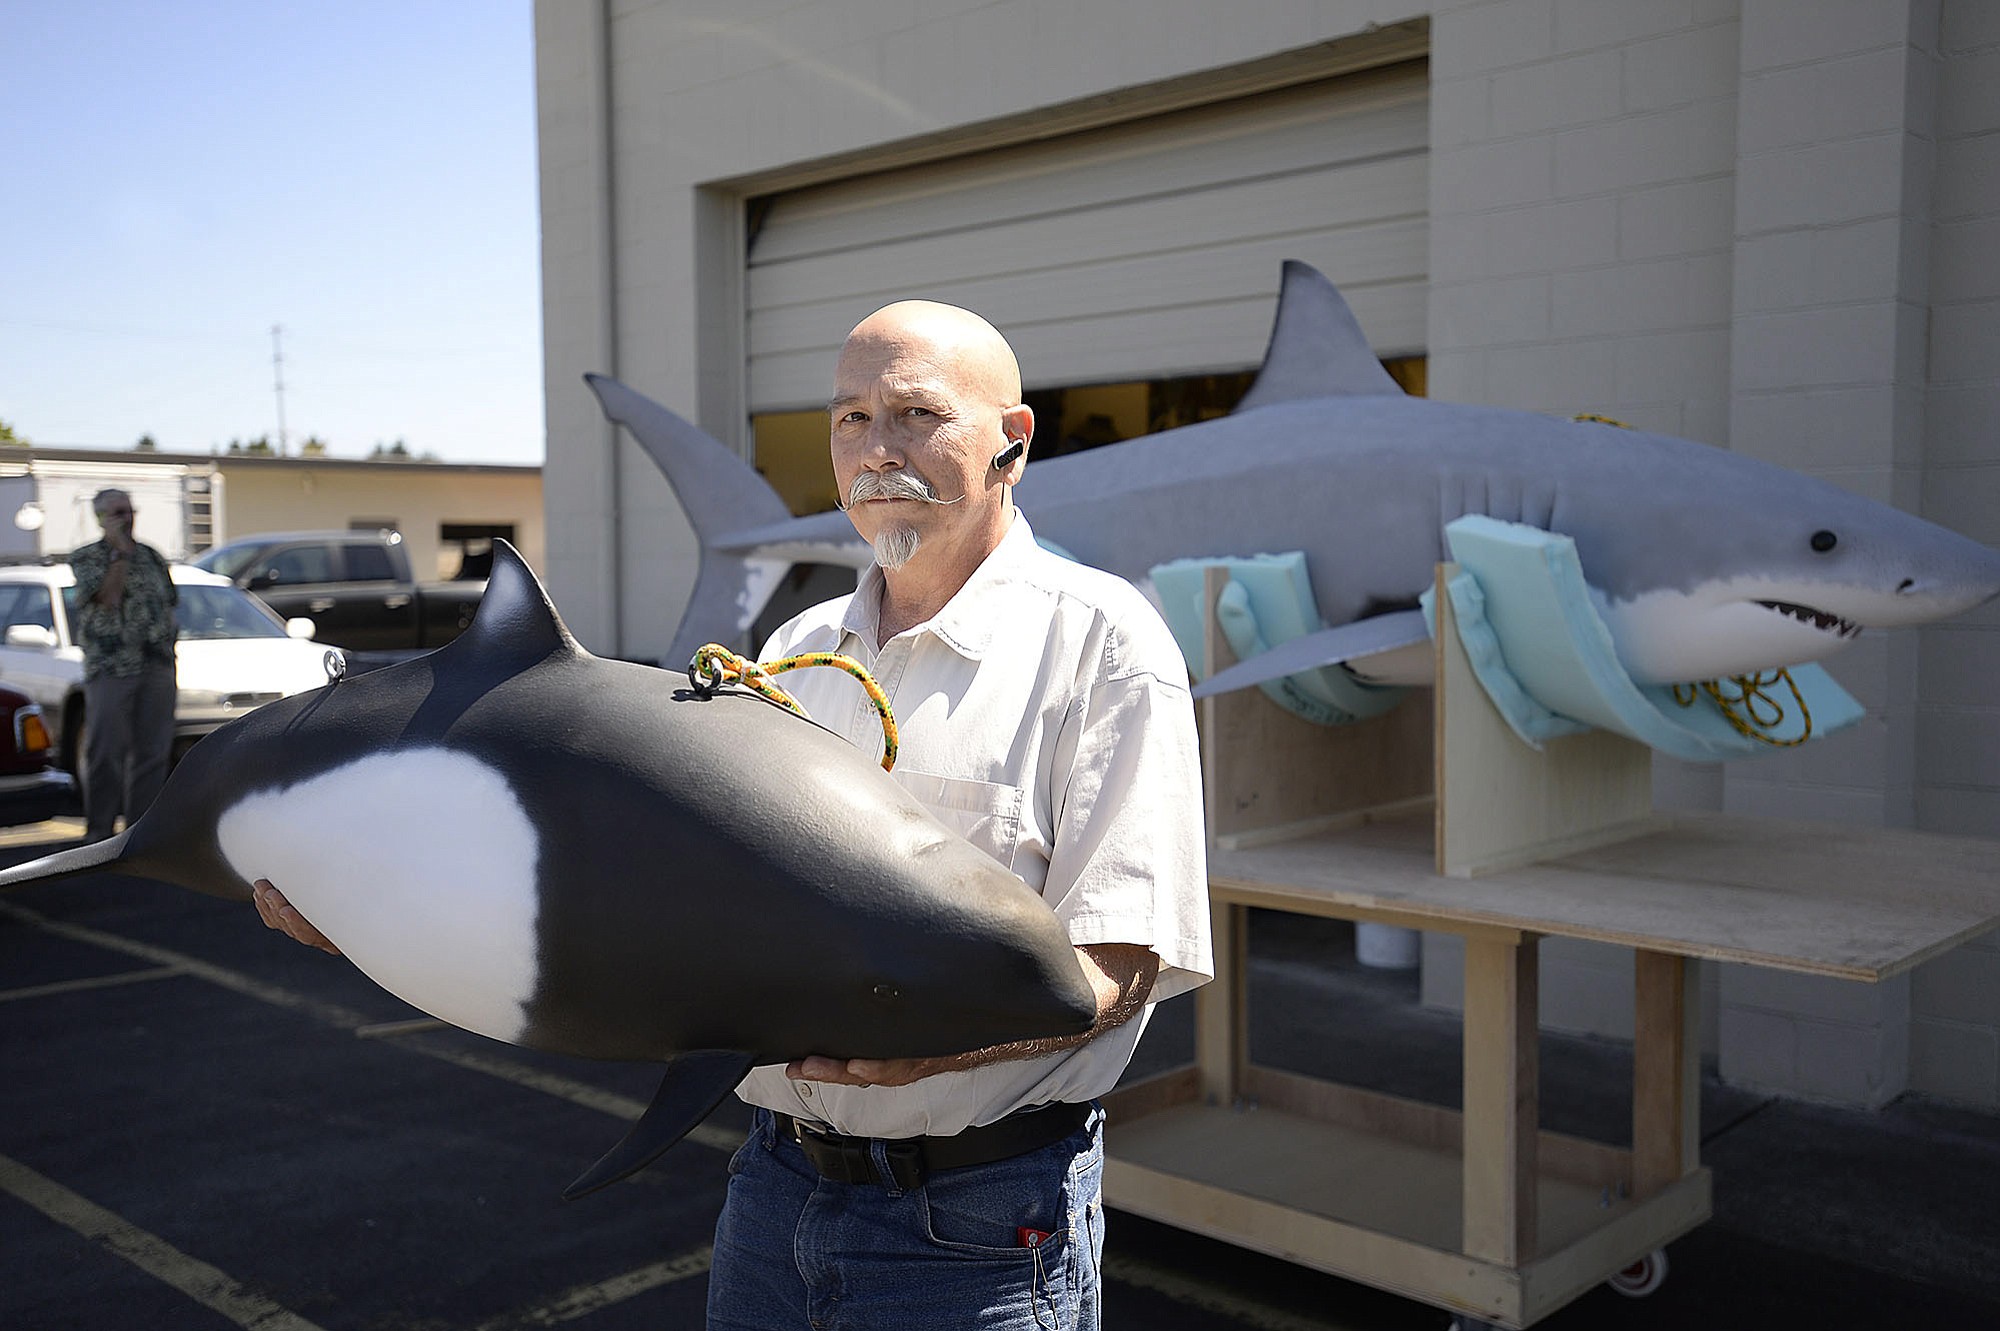 Jim Engelhardt of Show Time Exhibitions with a model of a Dall's porpoise that is part of a display for Point Reyes National Seashore in California.